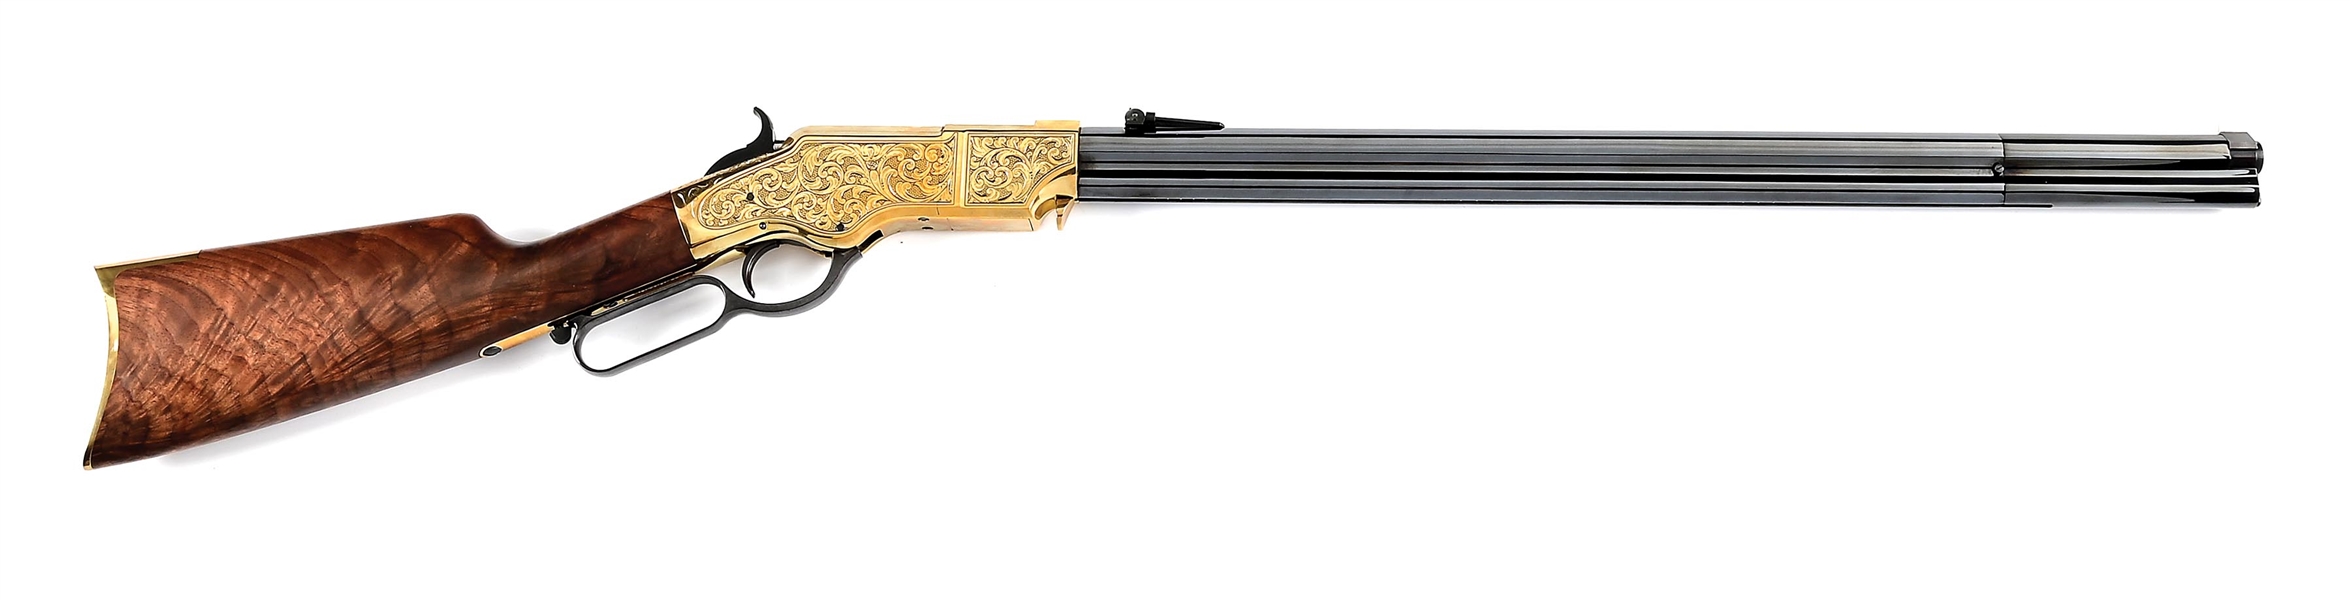 (M) DELUXE ENGRAVED HENRY REPEATING ARMS ORIGINAL HENRY LEVER ACTION RIFLE.